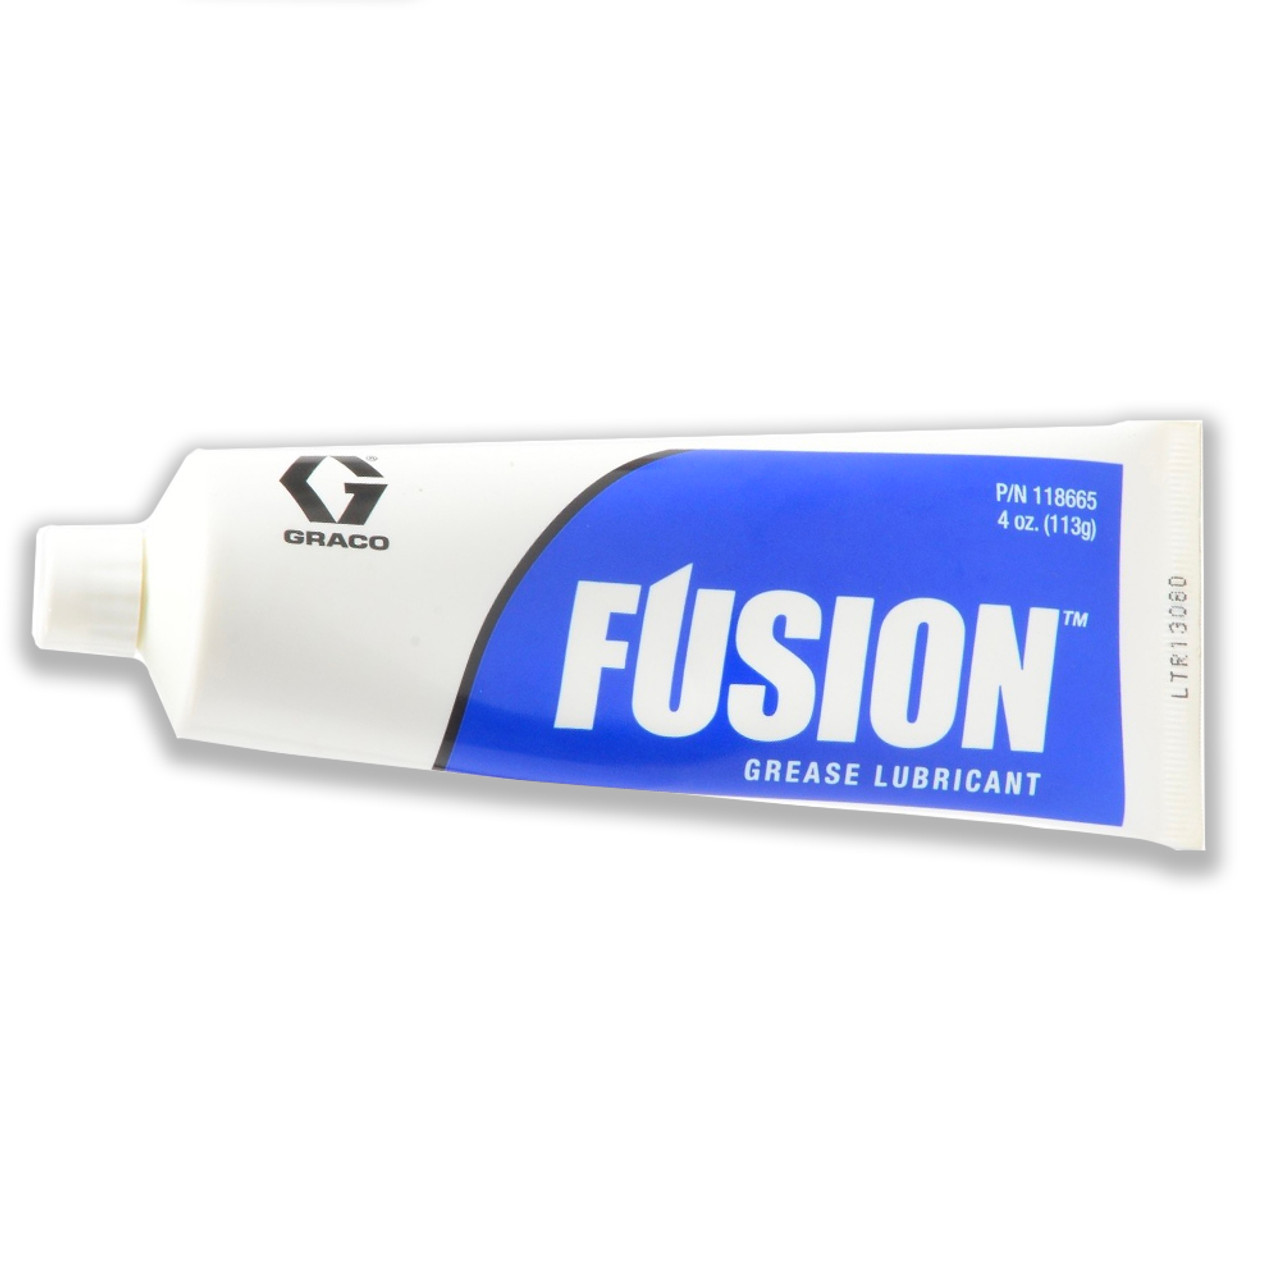 GRACO 248279 - Fusion Gun Grease Lube 4oz. - Pack of 10 Tubes